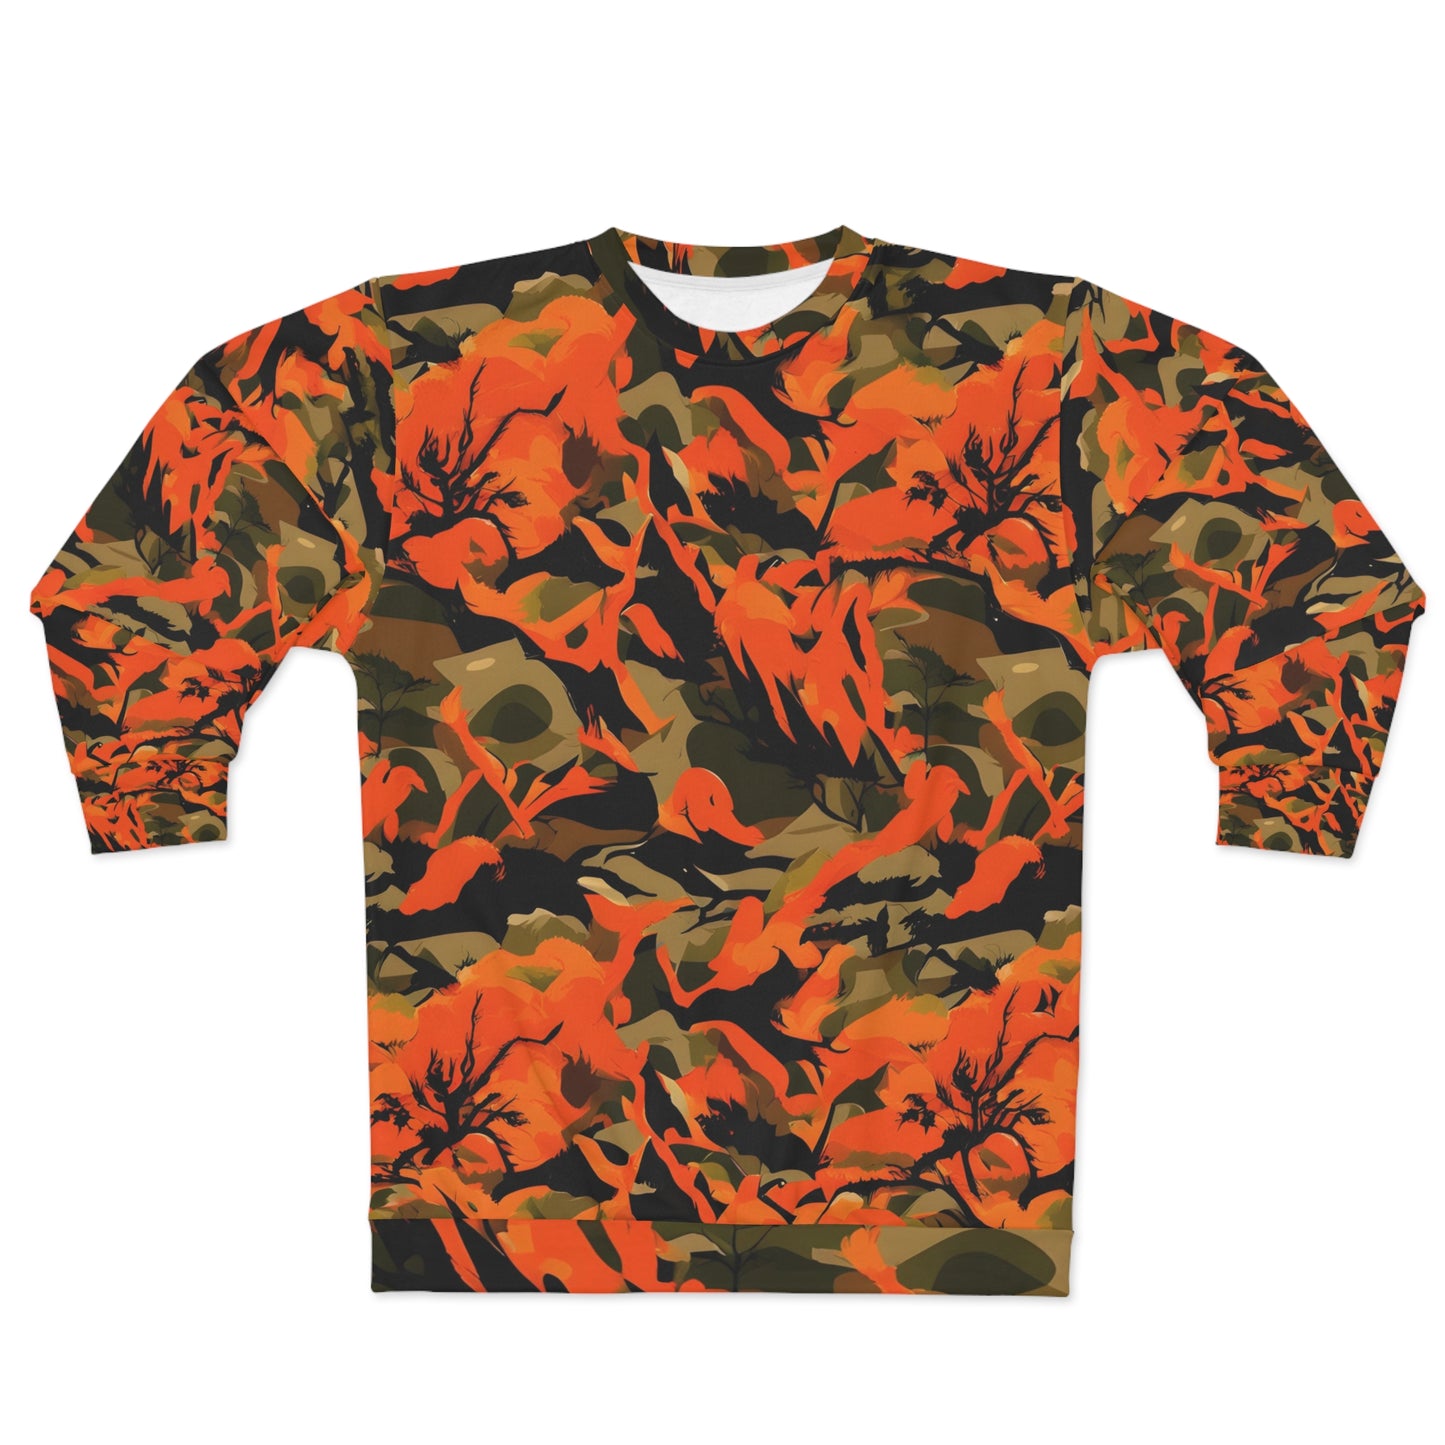 Hunting Camouflage Design with a Hint of Orange and Red Fire